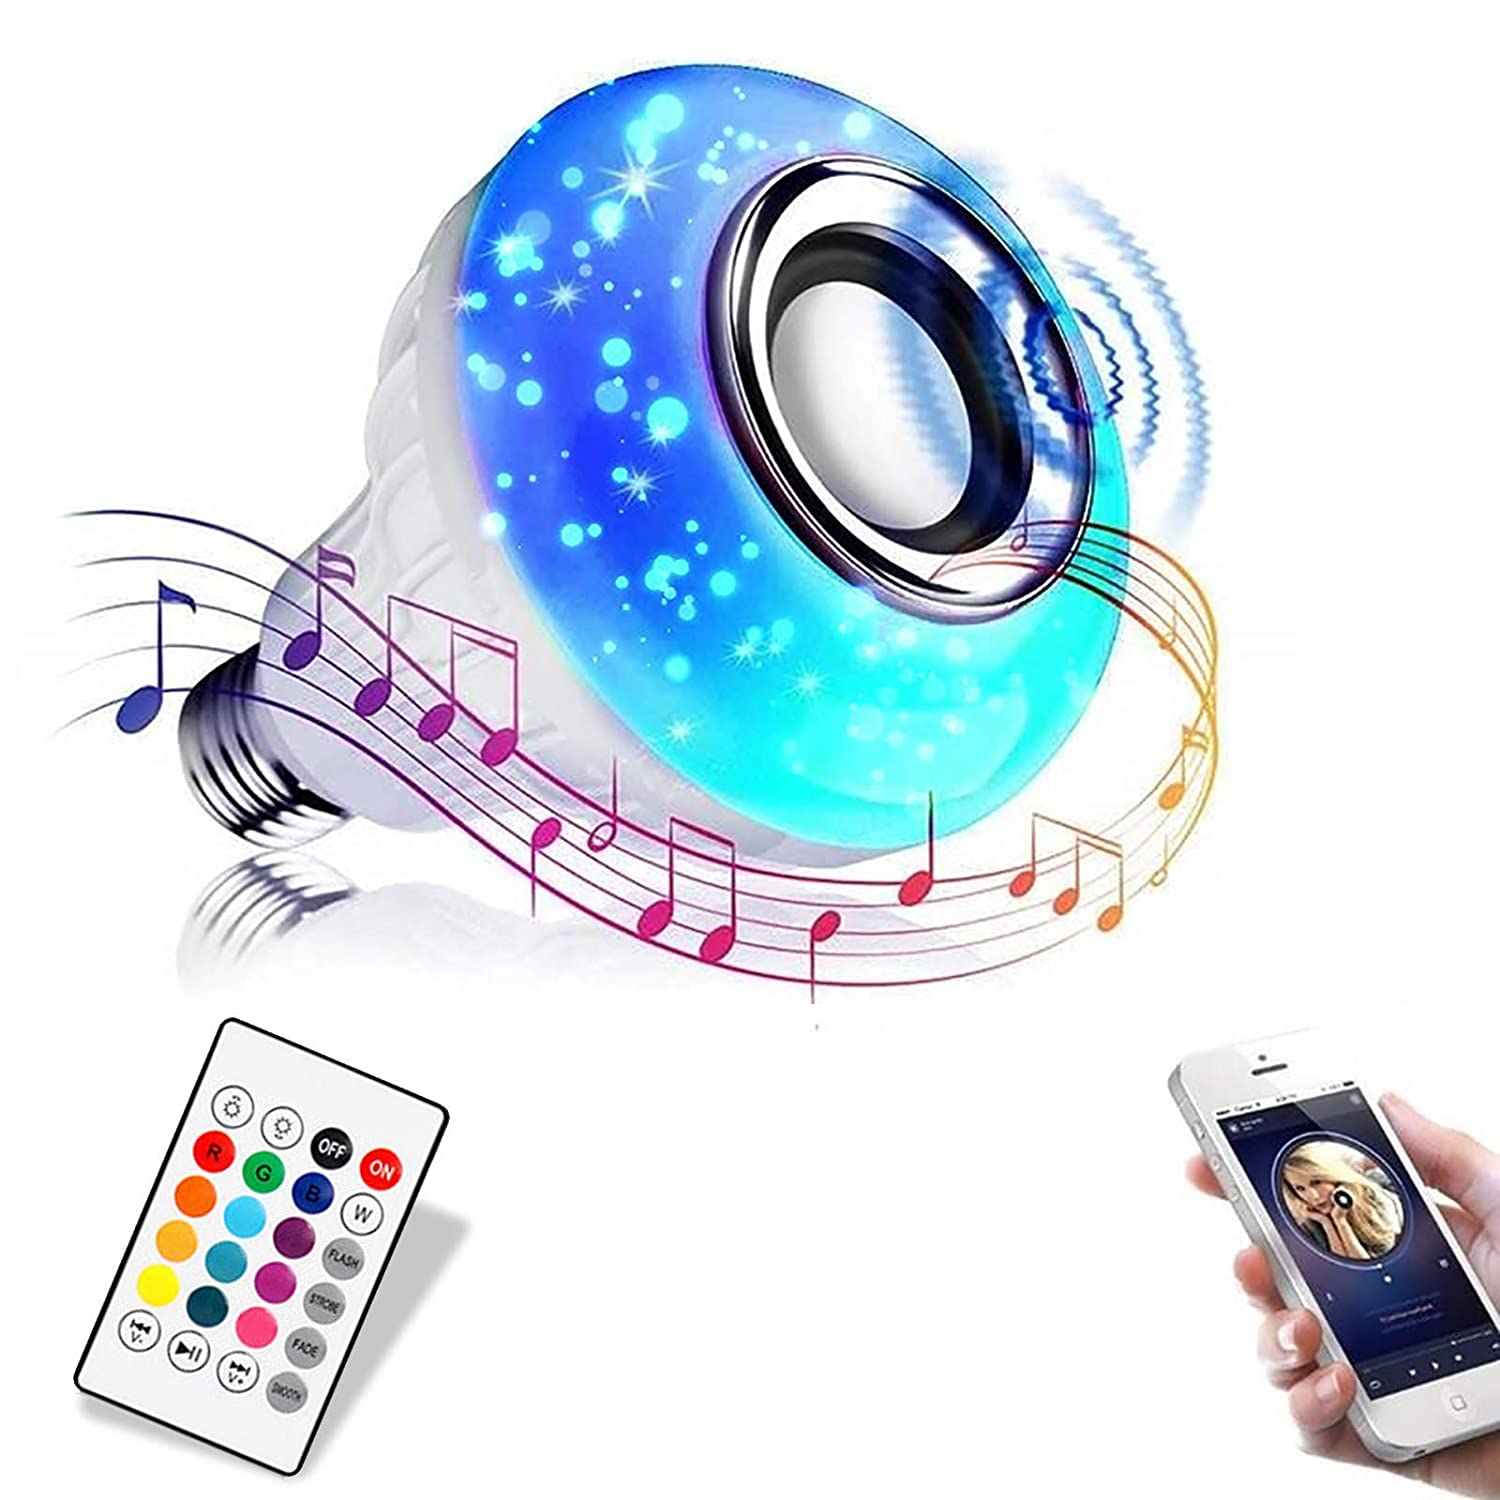 Glimmer Lightings home decoration bluetooth bulb lamp lights for Diwali Christmas Party and weddings